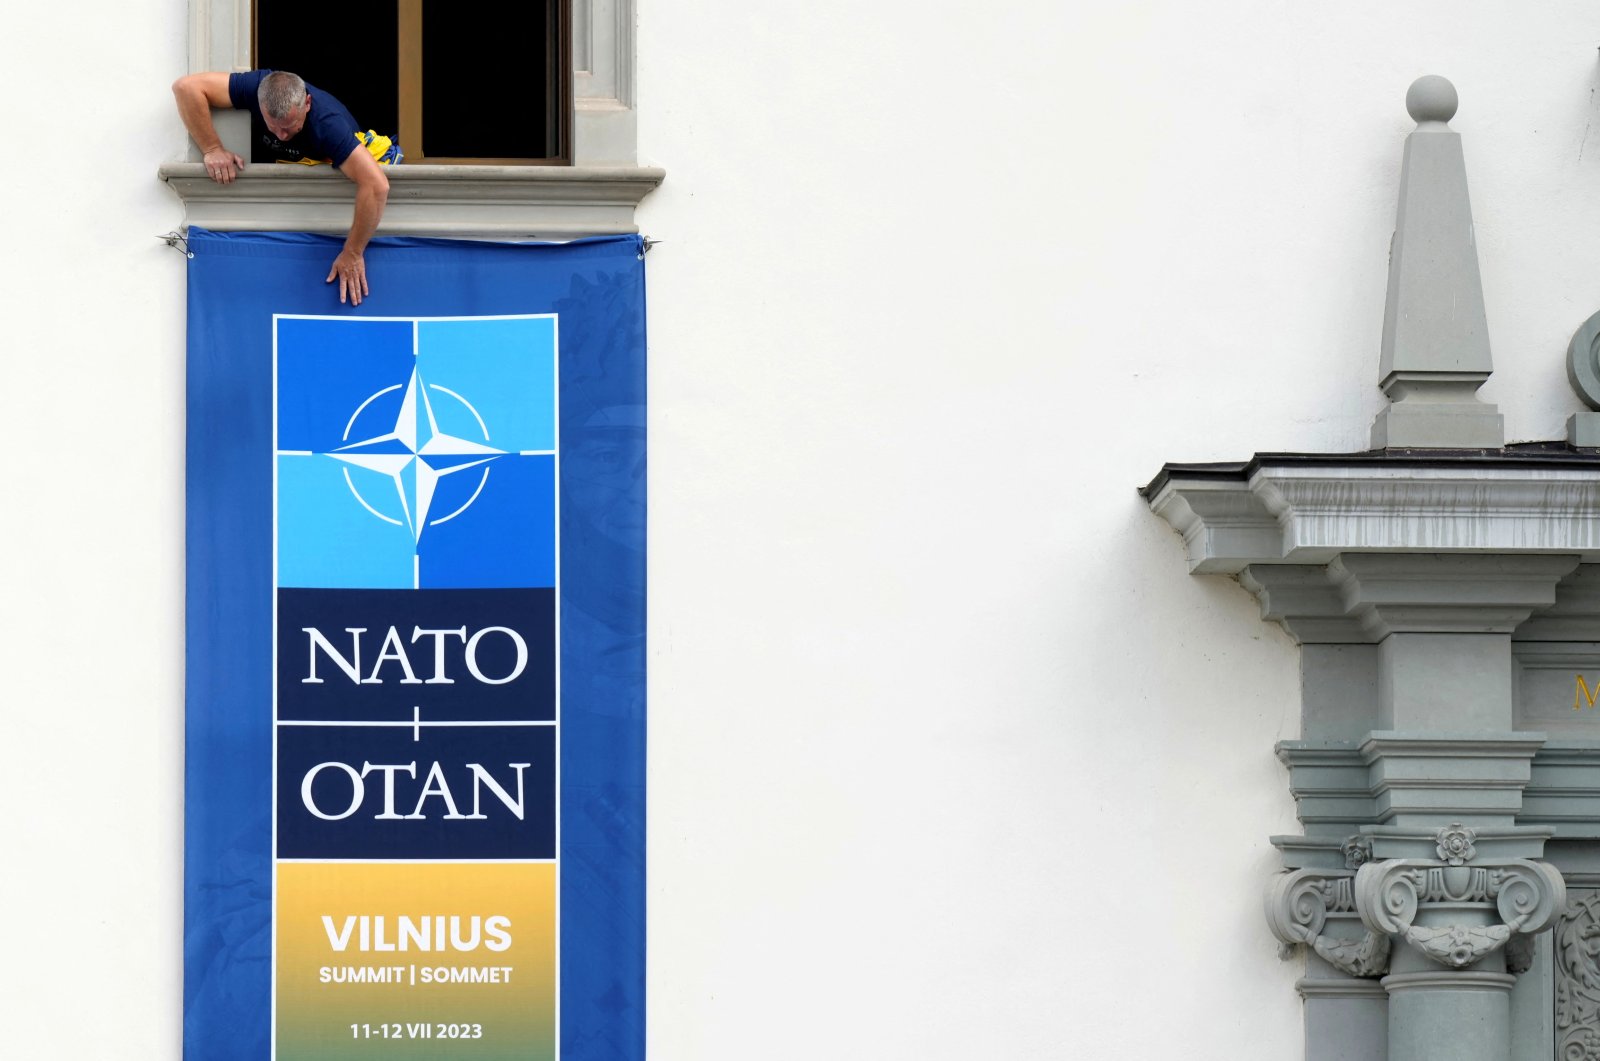 A worker installs a NATO summit banner on the wall of the Palace of the Grand Dukes of Lithuania in Vilnius, Lithuania, July 10, 2023. (Reuters Photo)